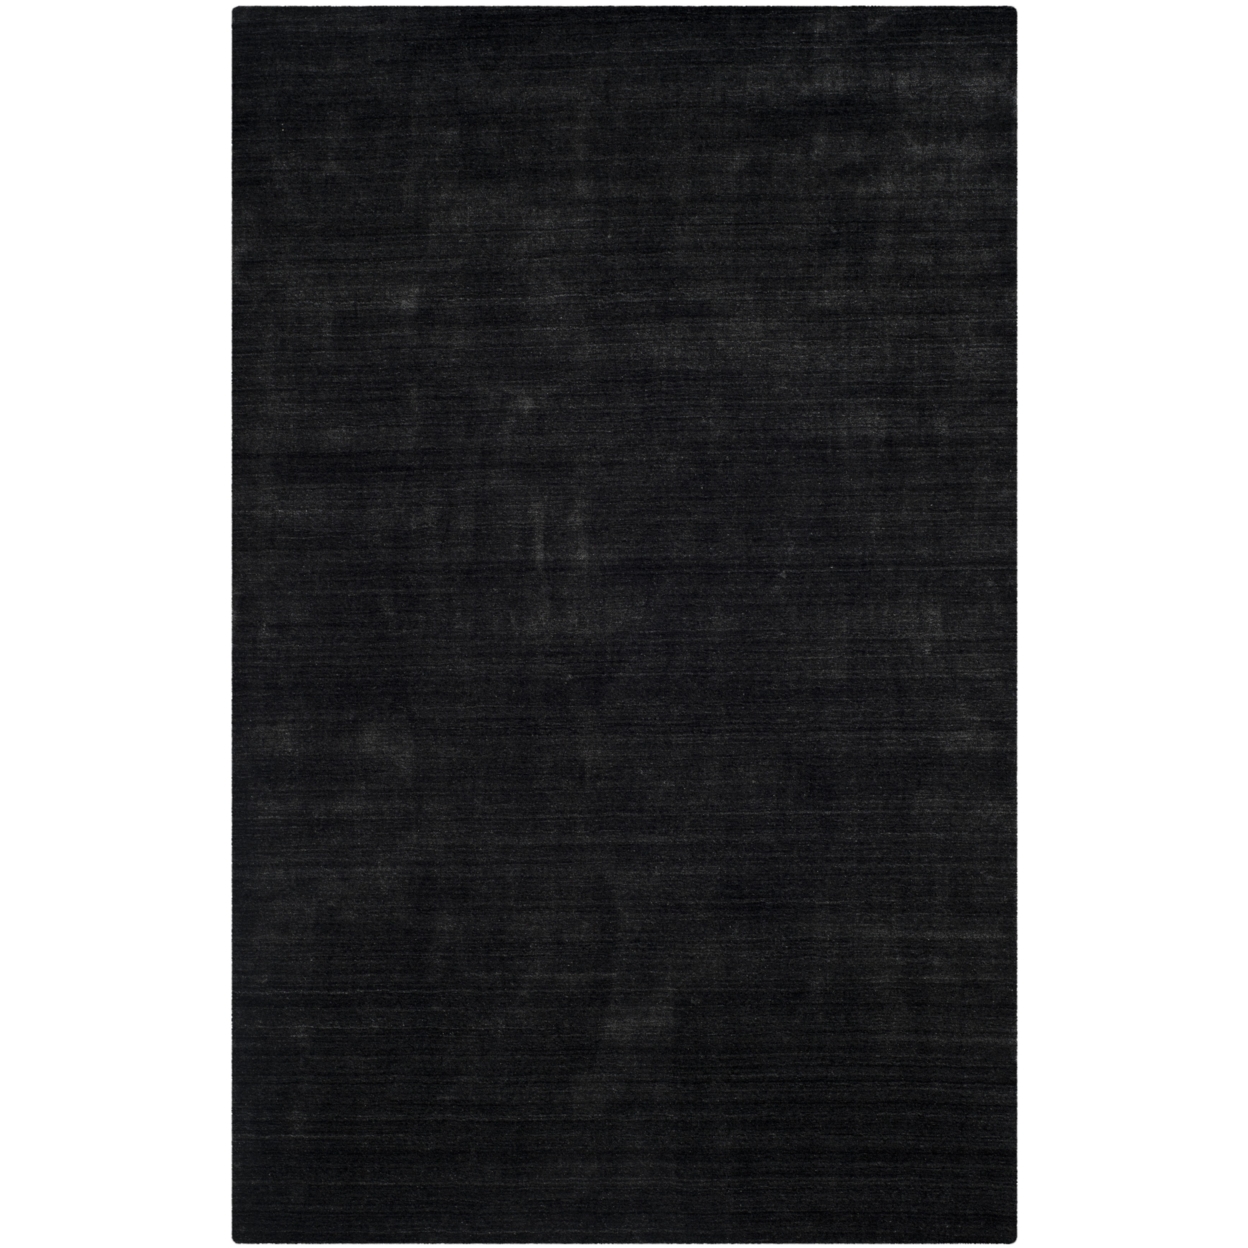 SAFAVIEH Mirage Collection MIR550D Handmade Anthracite Rug - 6' Square